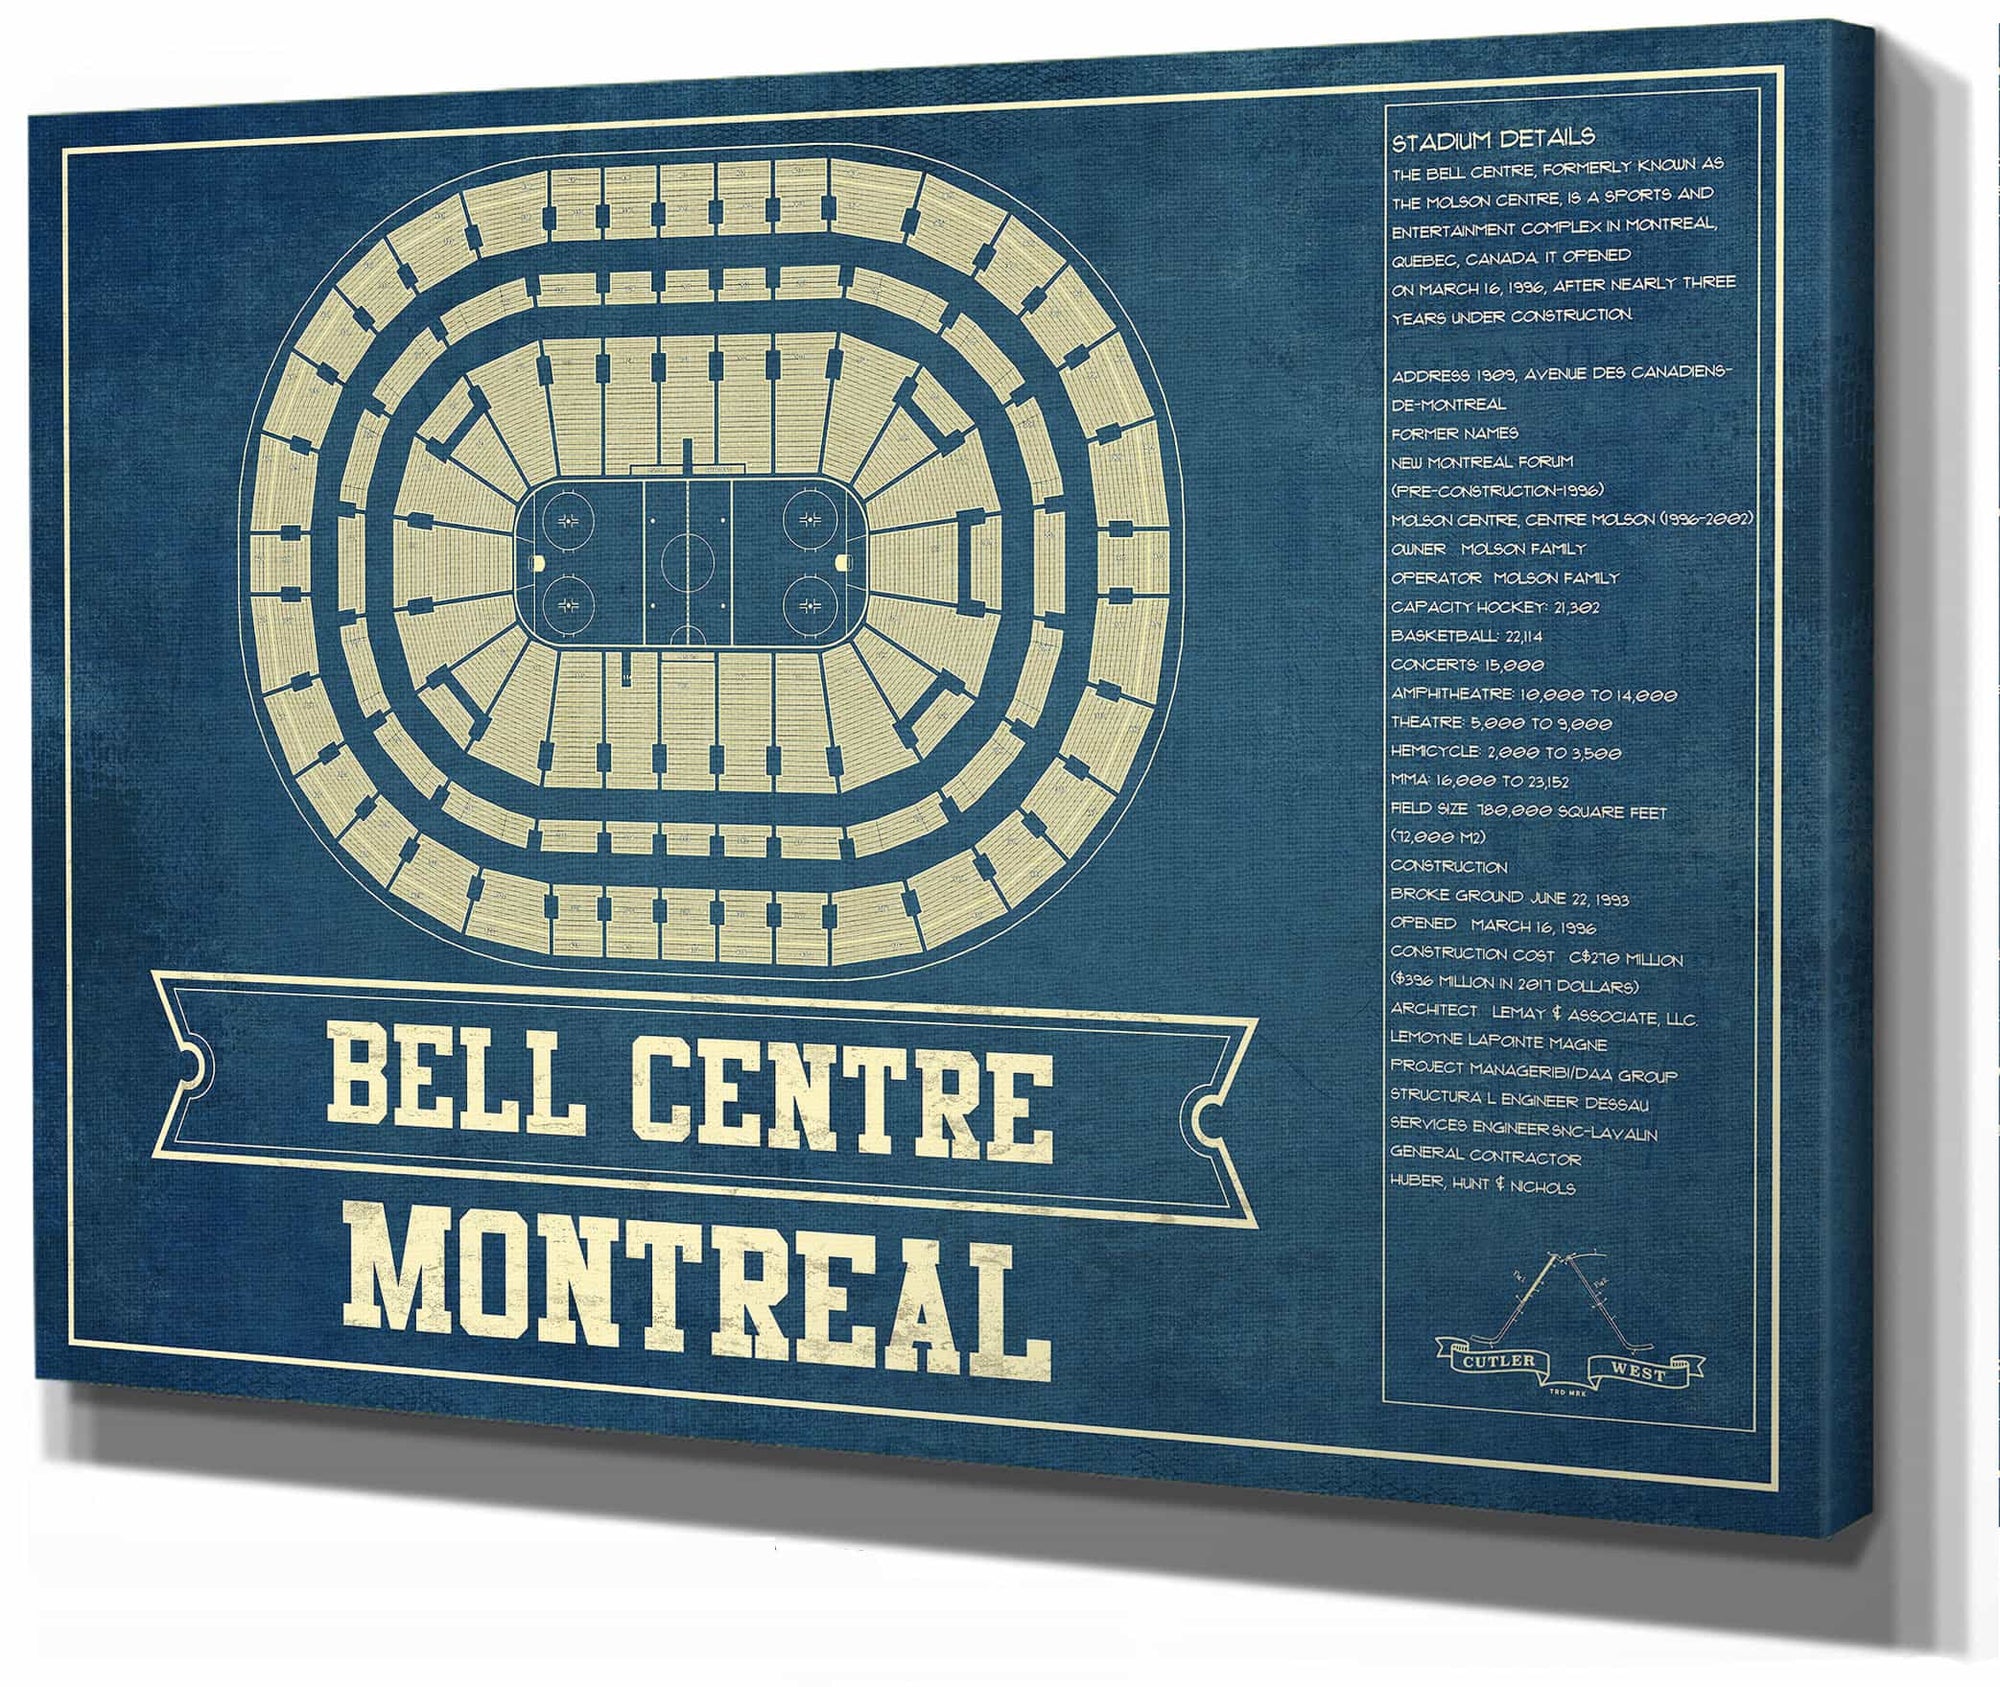 Montreal Canadiens Bell Centre Seating Chart - Vintage Hockey Print